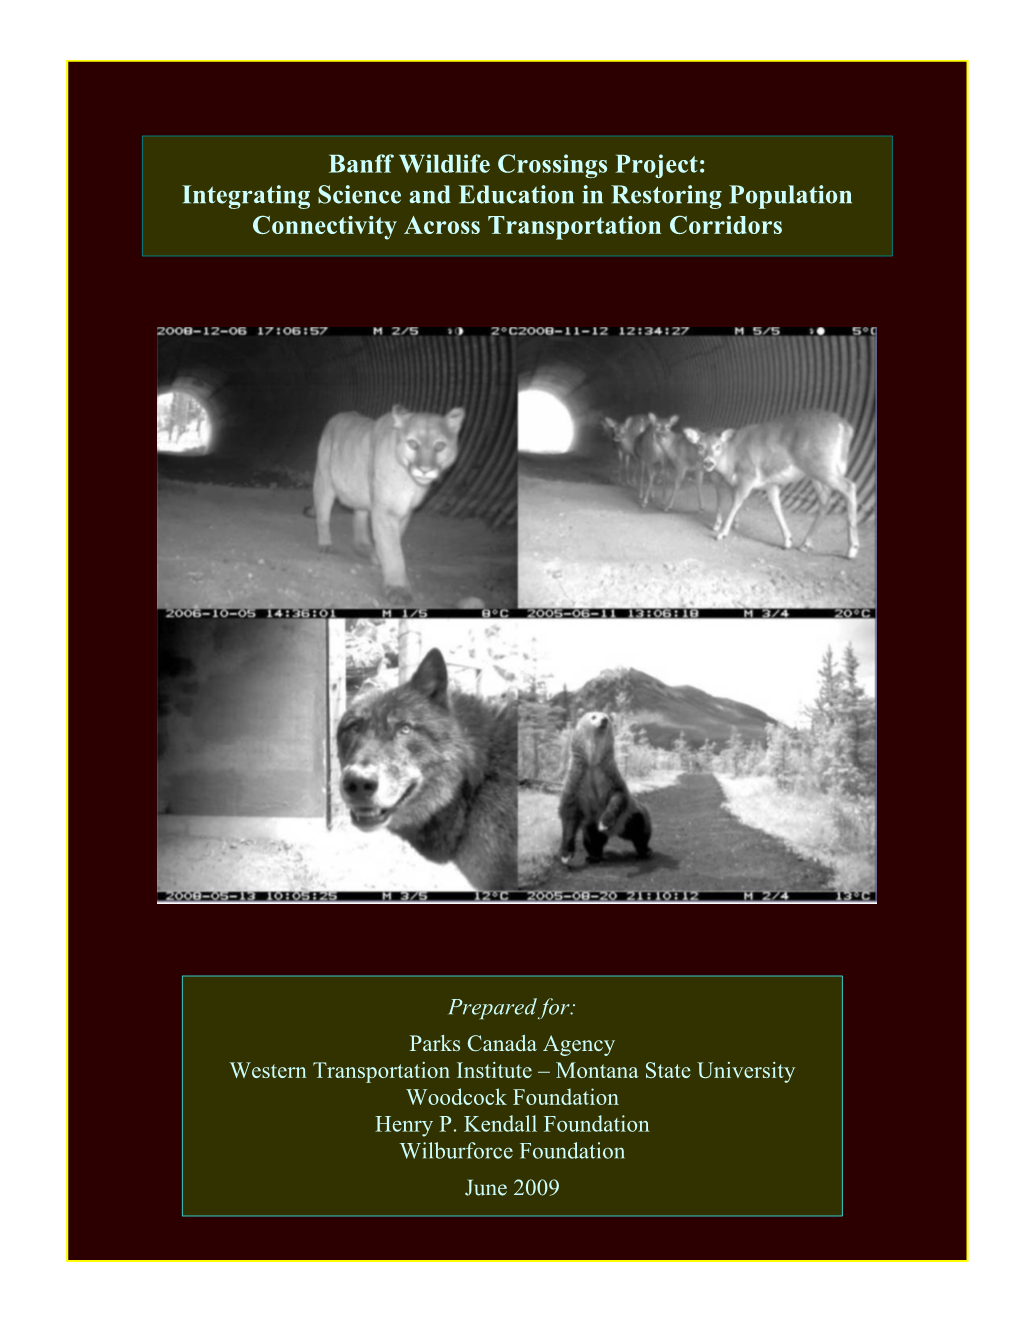 Banff Wildlife Crossings Project: Integrating Science and Education in Restoring Population Connectivity Across Transportation Corridors